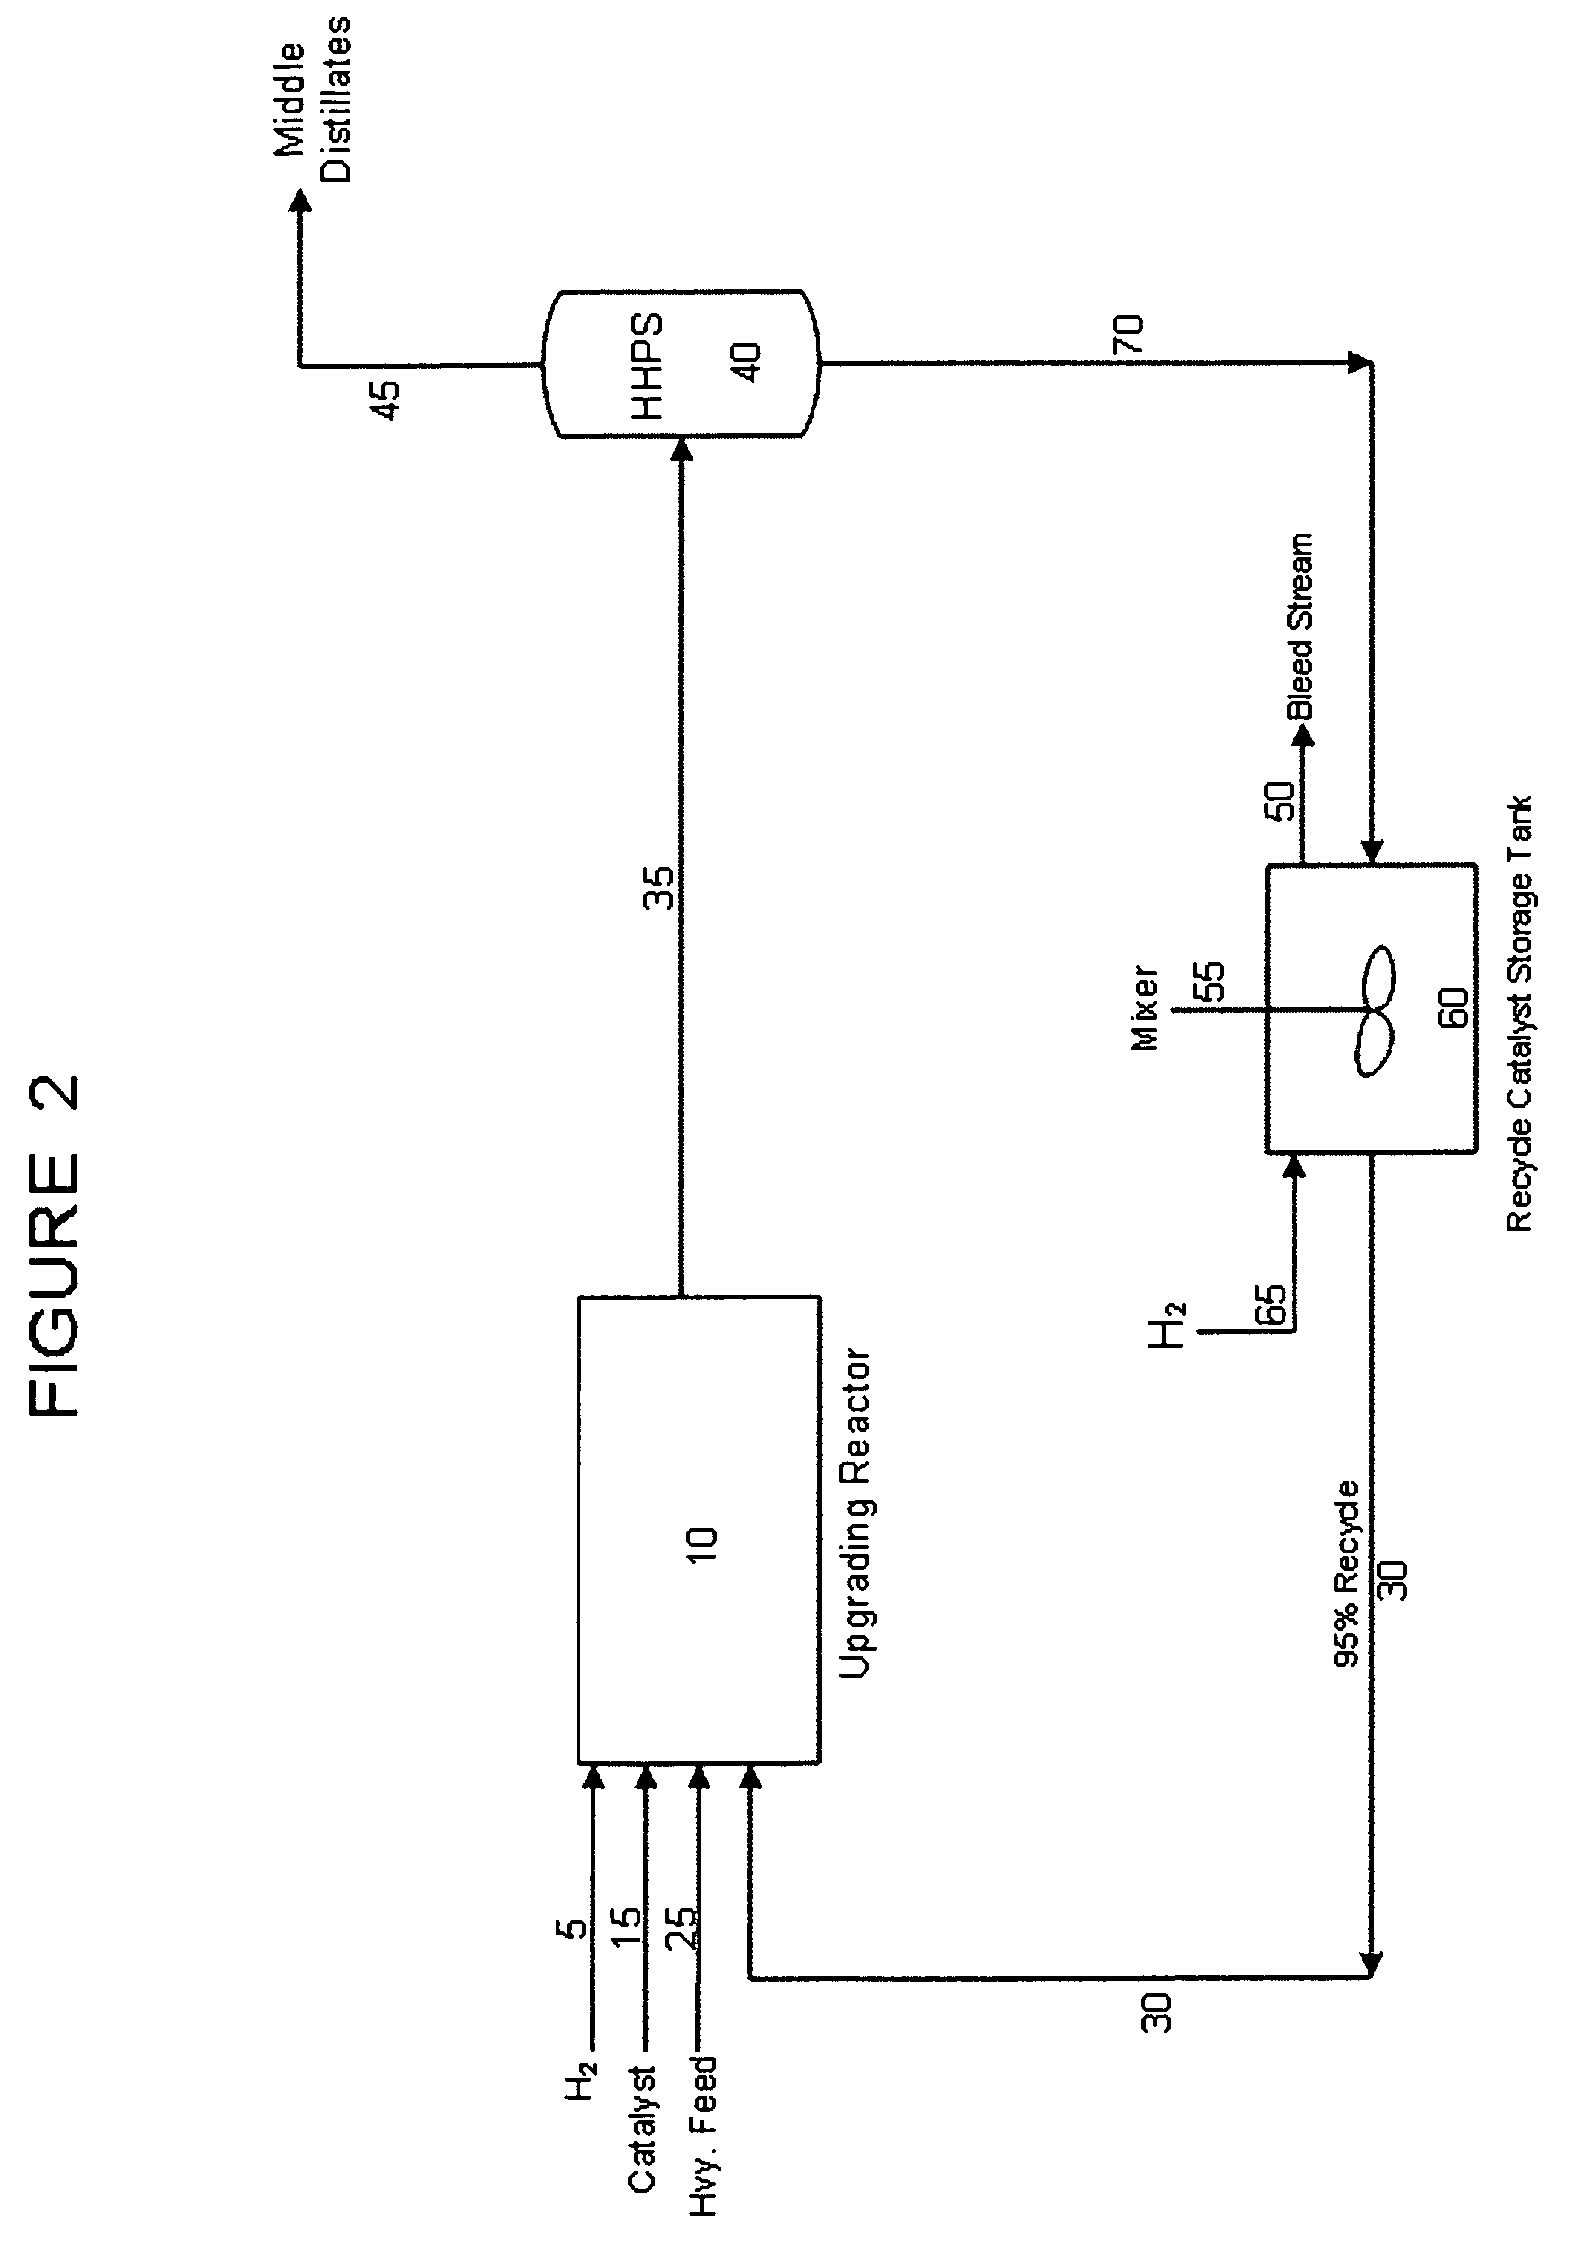 Process for producing tailored synthetic crude oil that optimize crude slates in target refineries